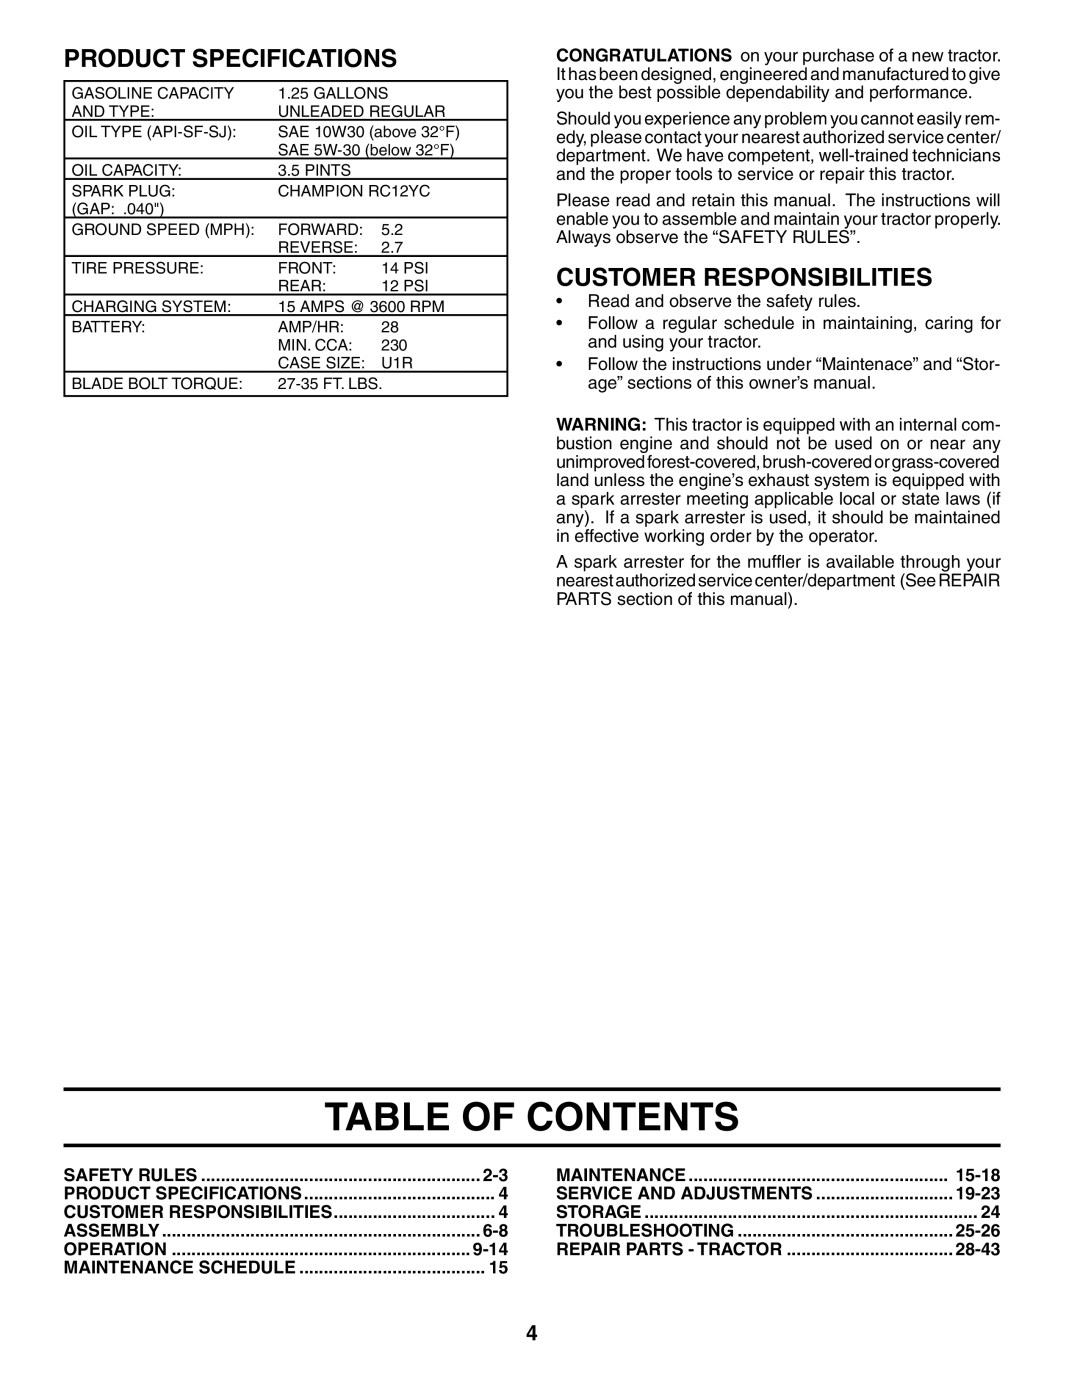 Husqvarna YTH1842 owner manual Table Of Contents, Product Specifications, Customer Responsibilities 